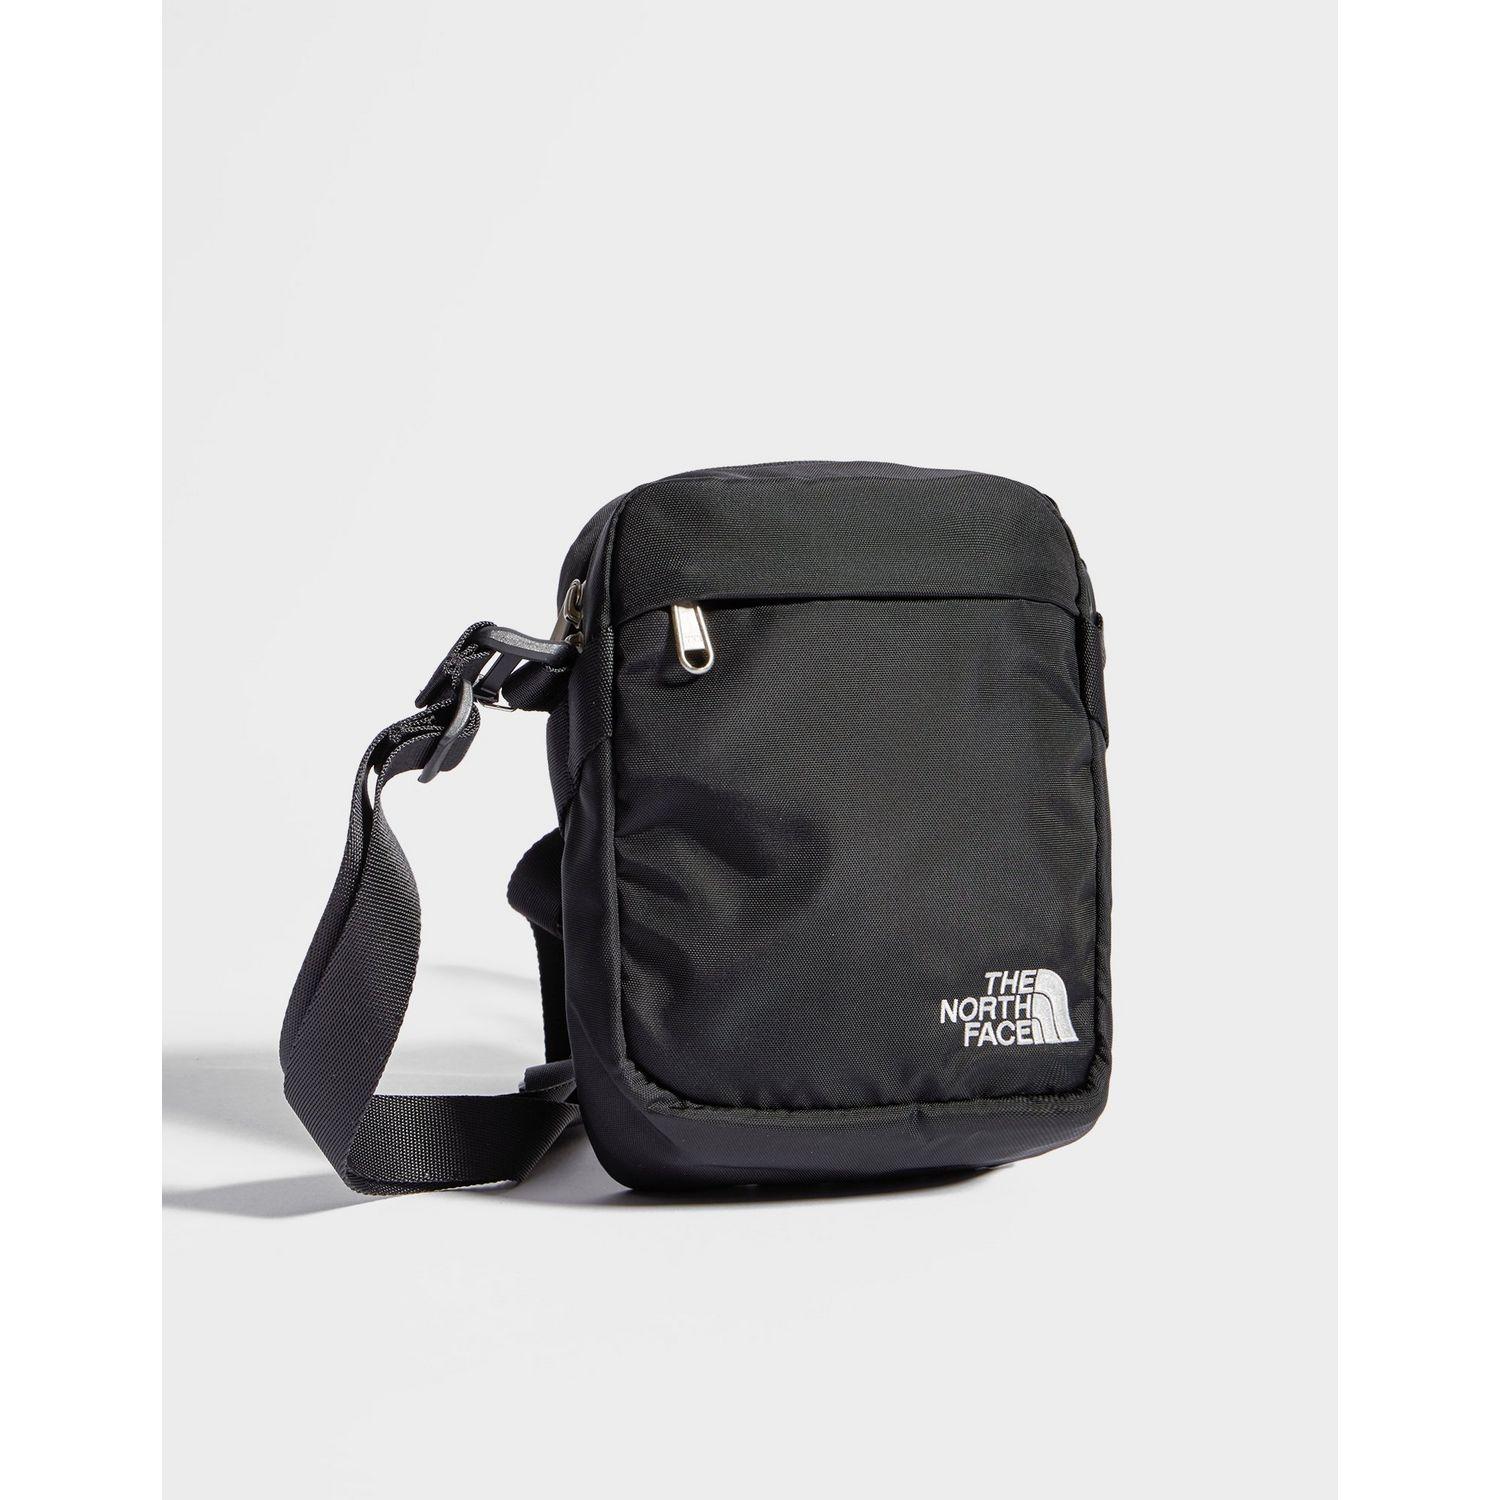 The North Face Convertible Crossbody Bag in Black for Men - Lyst